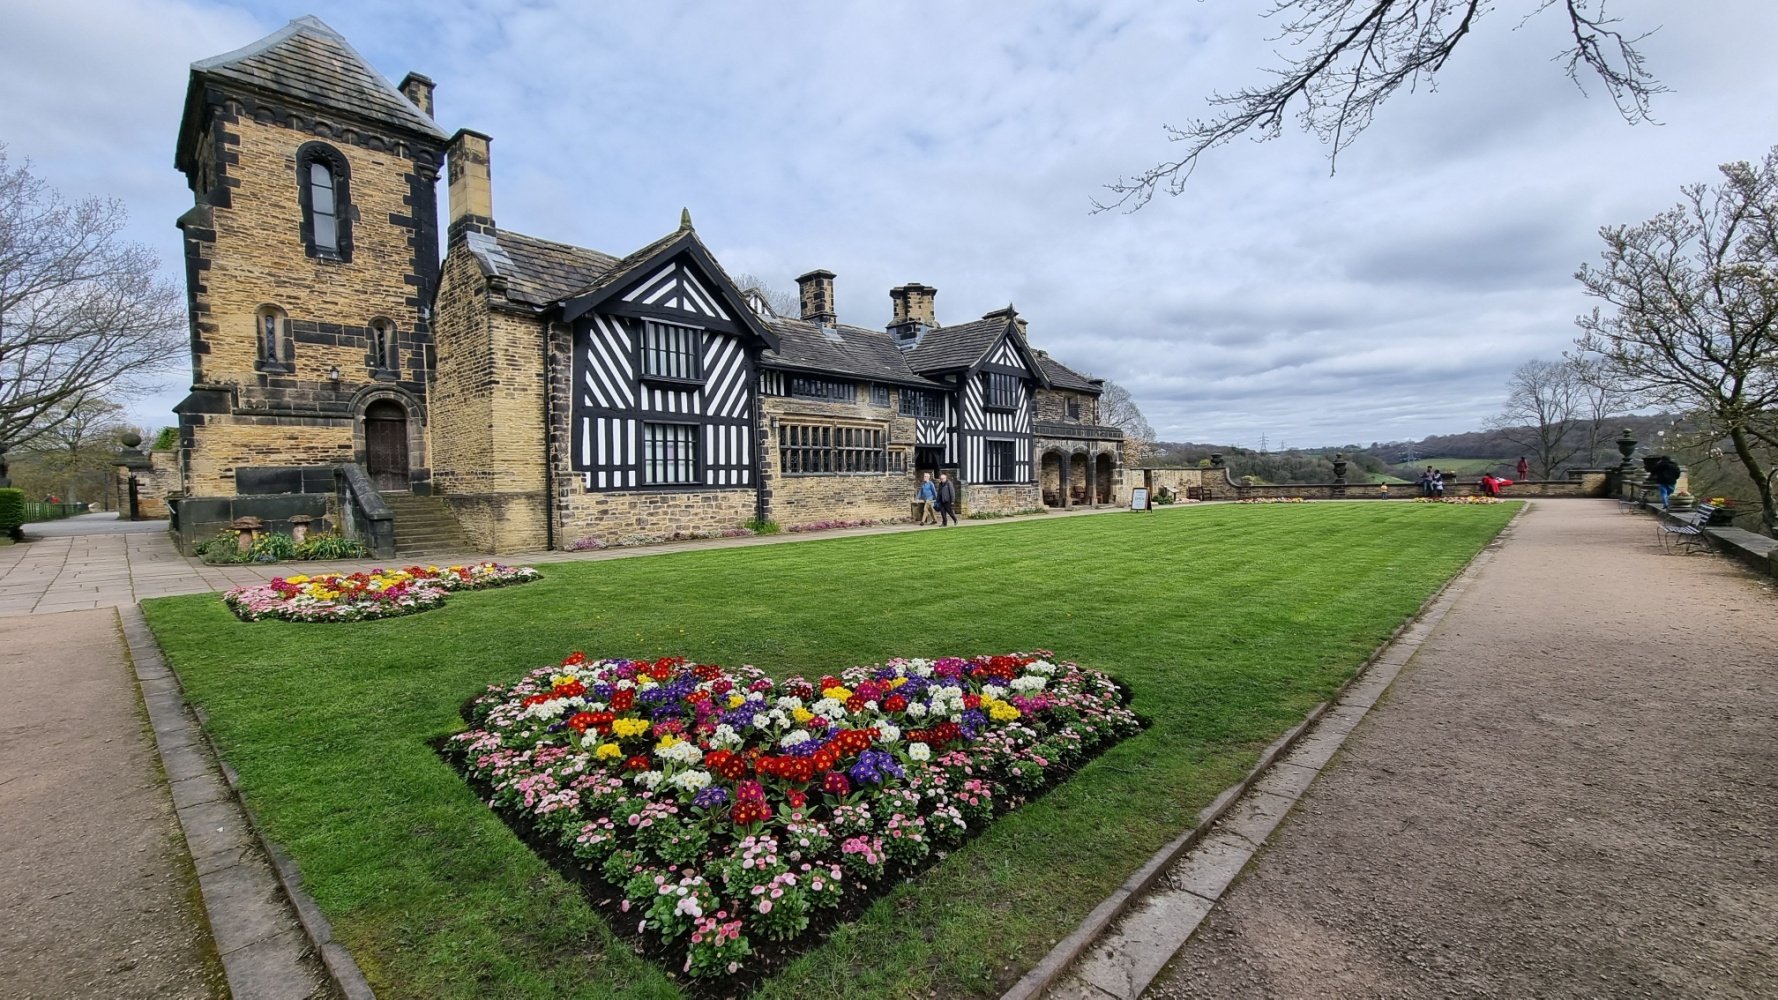 Image name shibden hall halifax west yorkshire the 21 image from the post A look at the history of Shibden Hall, with Dr Emma Wells in Yorkshire.com.